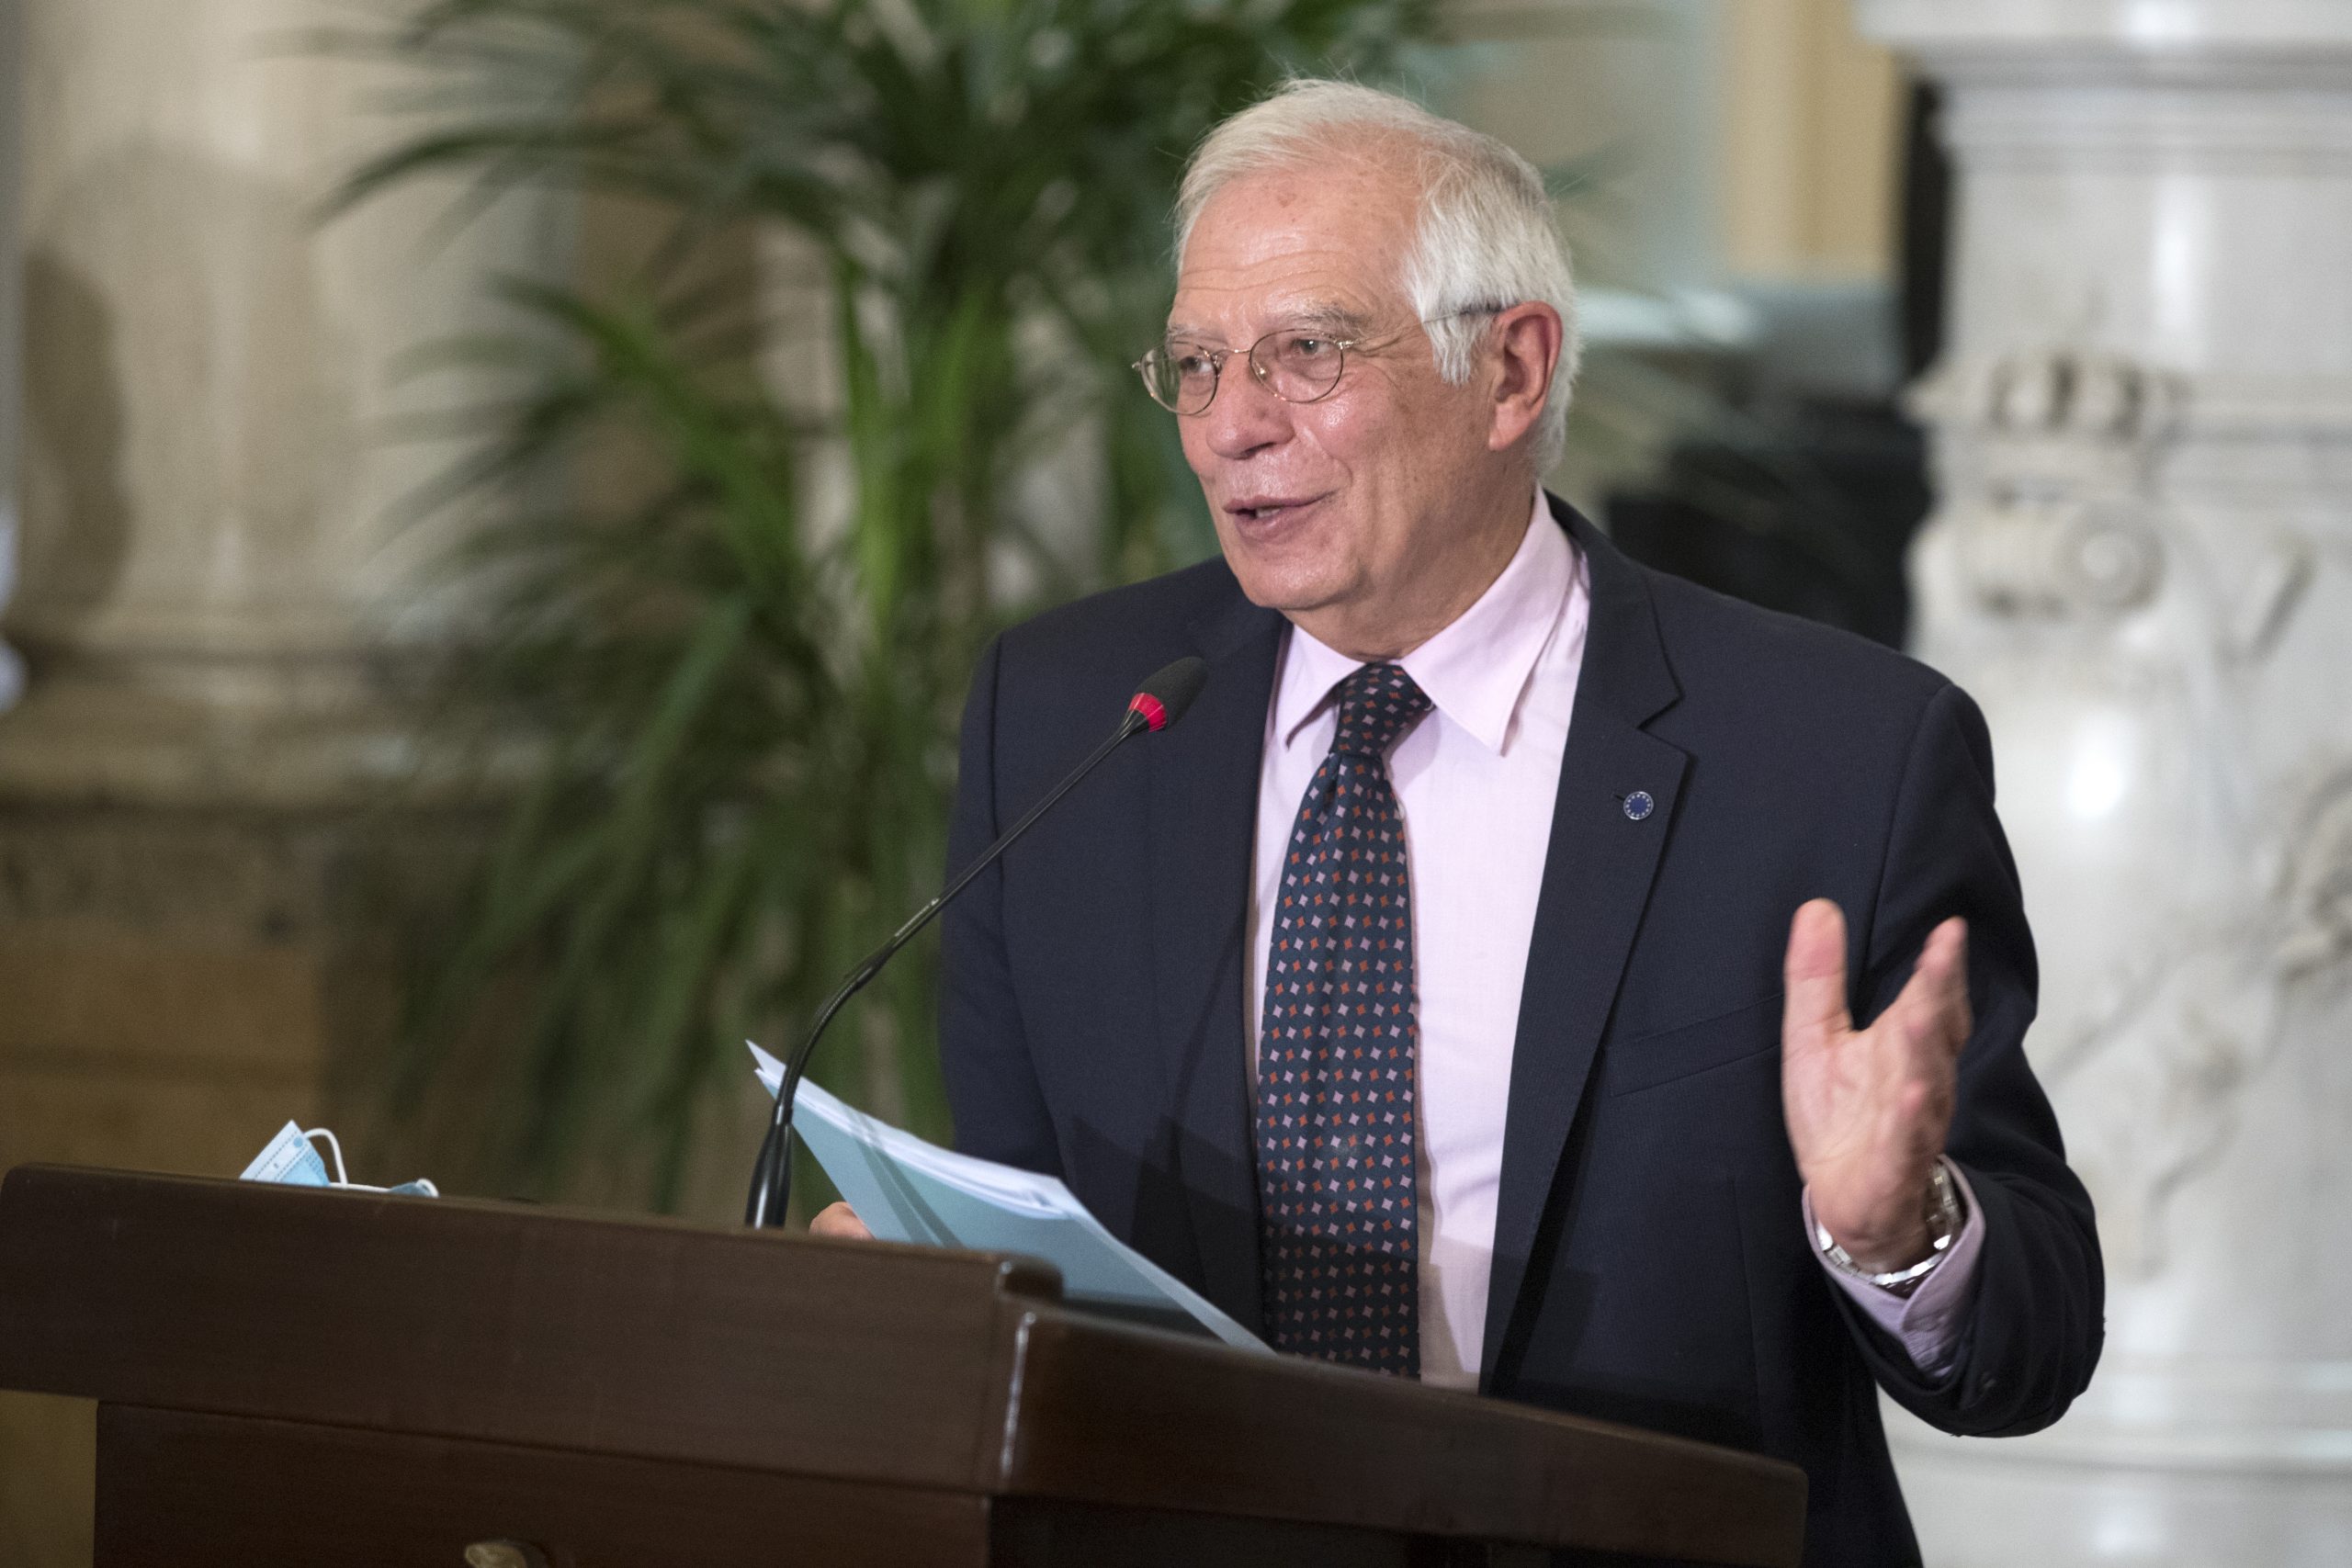 © European Union, 2021, Source: EC - Audiovisual Service, The High Representative of the European Union for Foreign Affairs and Security Policy Josep Borrell during press conference after a meeting Egyptian Foreign Minister Sameh Hassan Shoukry in Cairo on September 3, 2020.